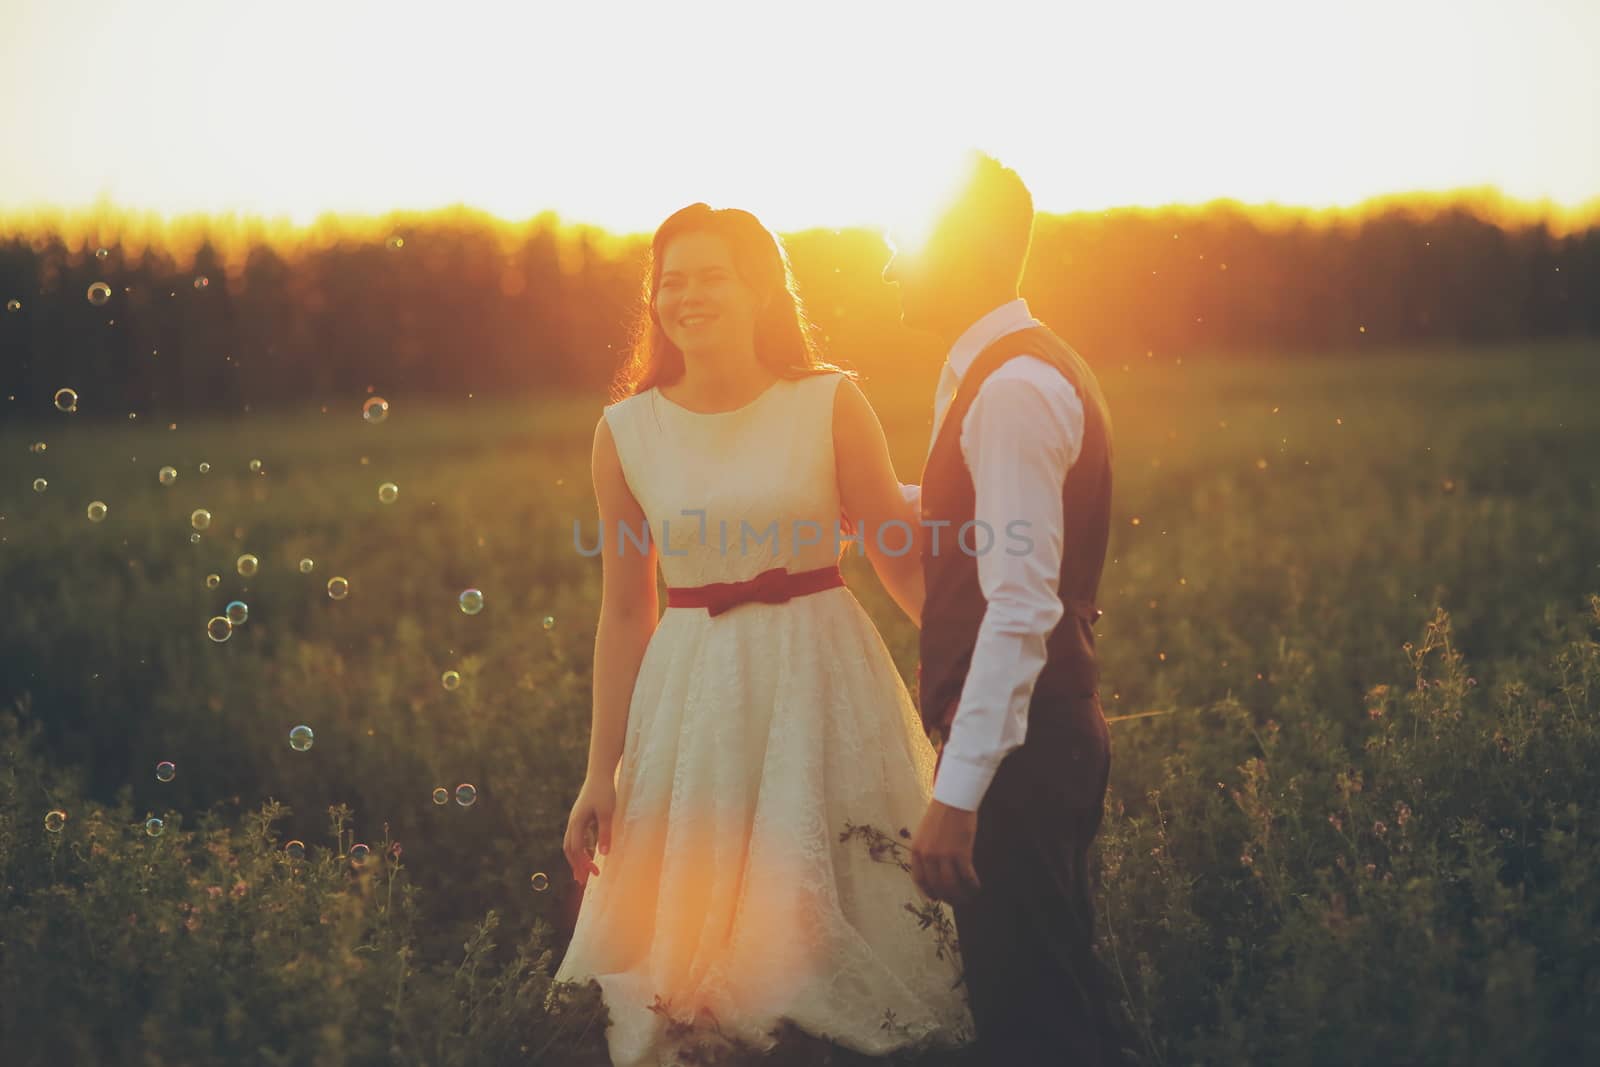 The bride and groom hold hands and walk in the park. Sunset light. Bubble. Wedding. Happy family concept. High quality photo